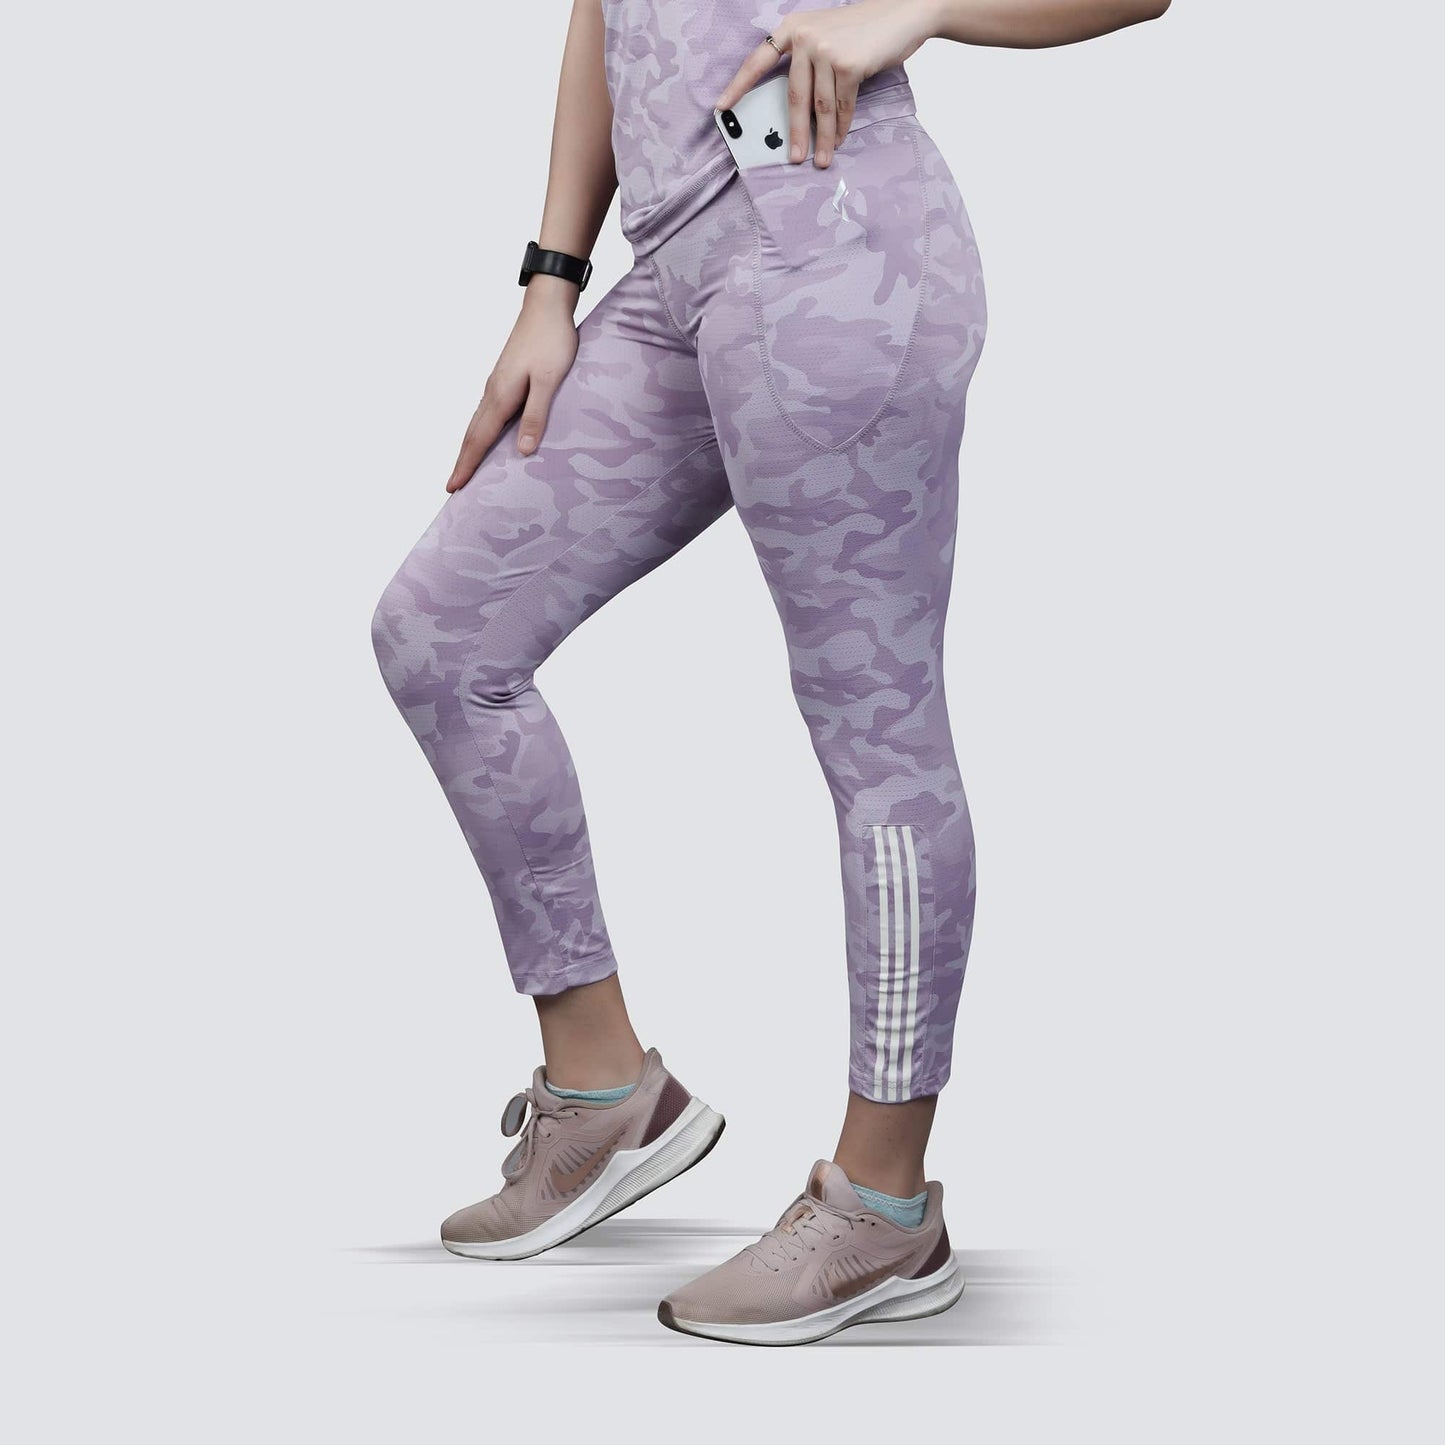 Women's Camo Workout High-Waisted Stretchable Leggings - Purple - Valetica Sports